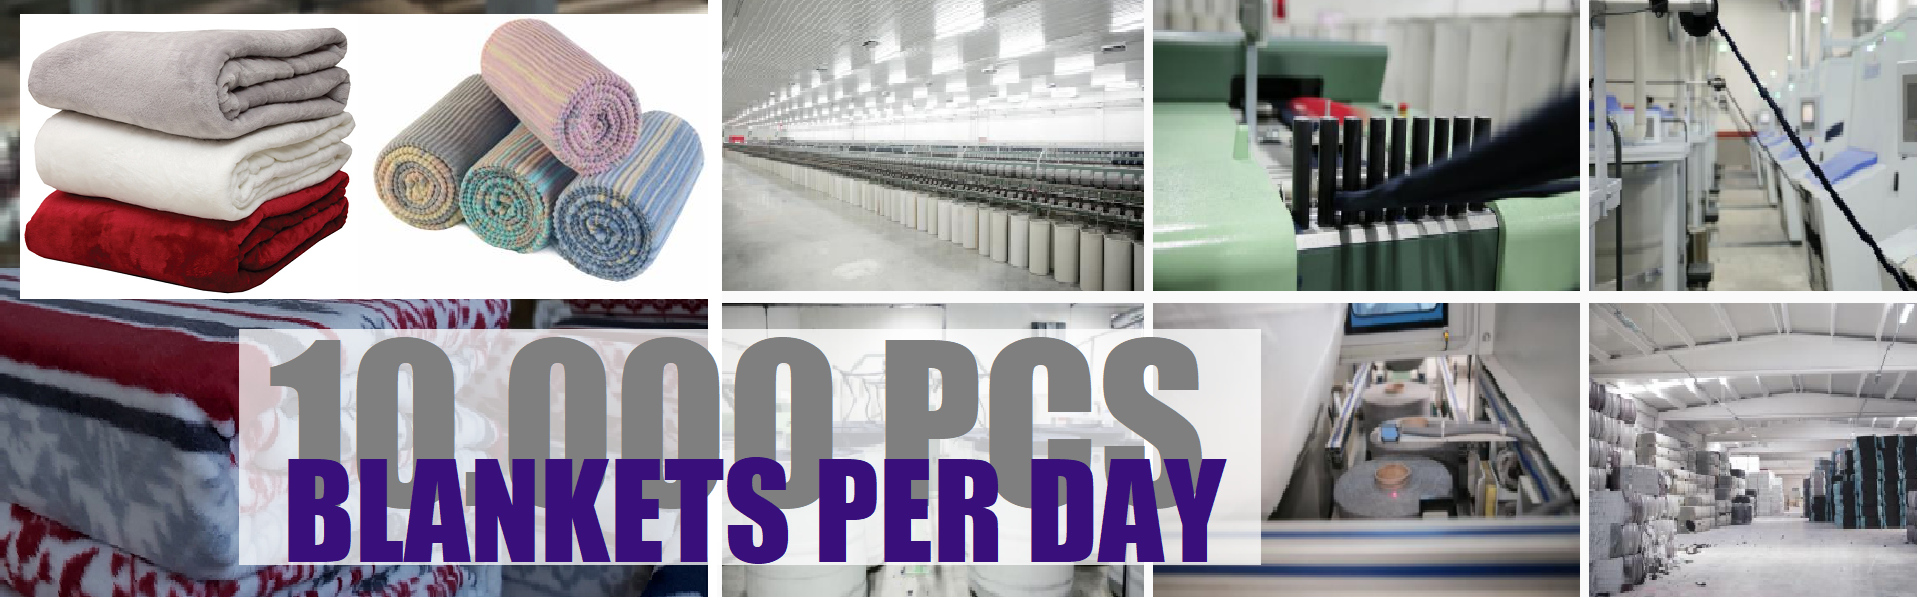 Our Production Capacity 10.000 Pieces/Day. In a wide range of colors and patterns! 